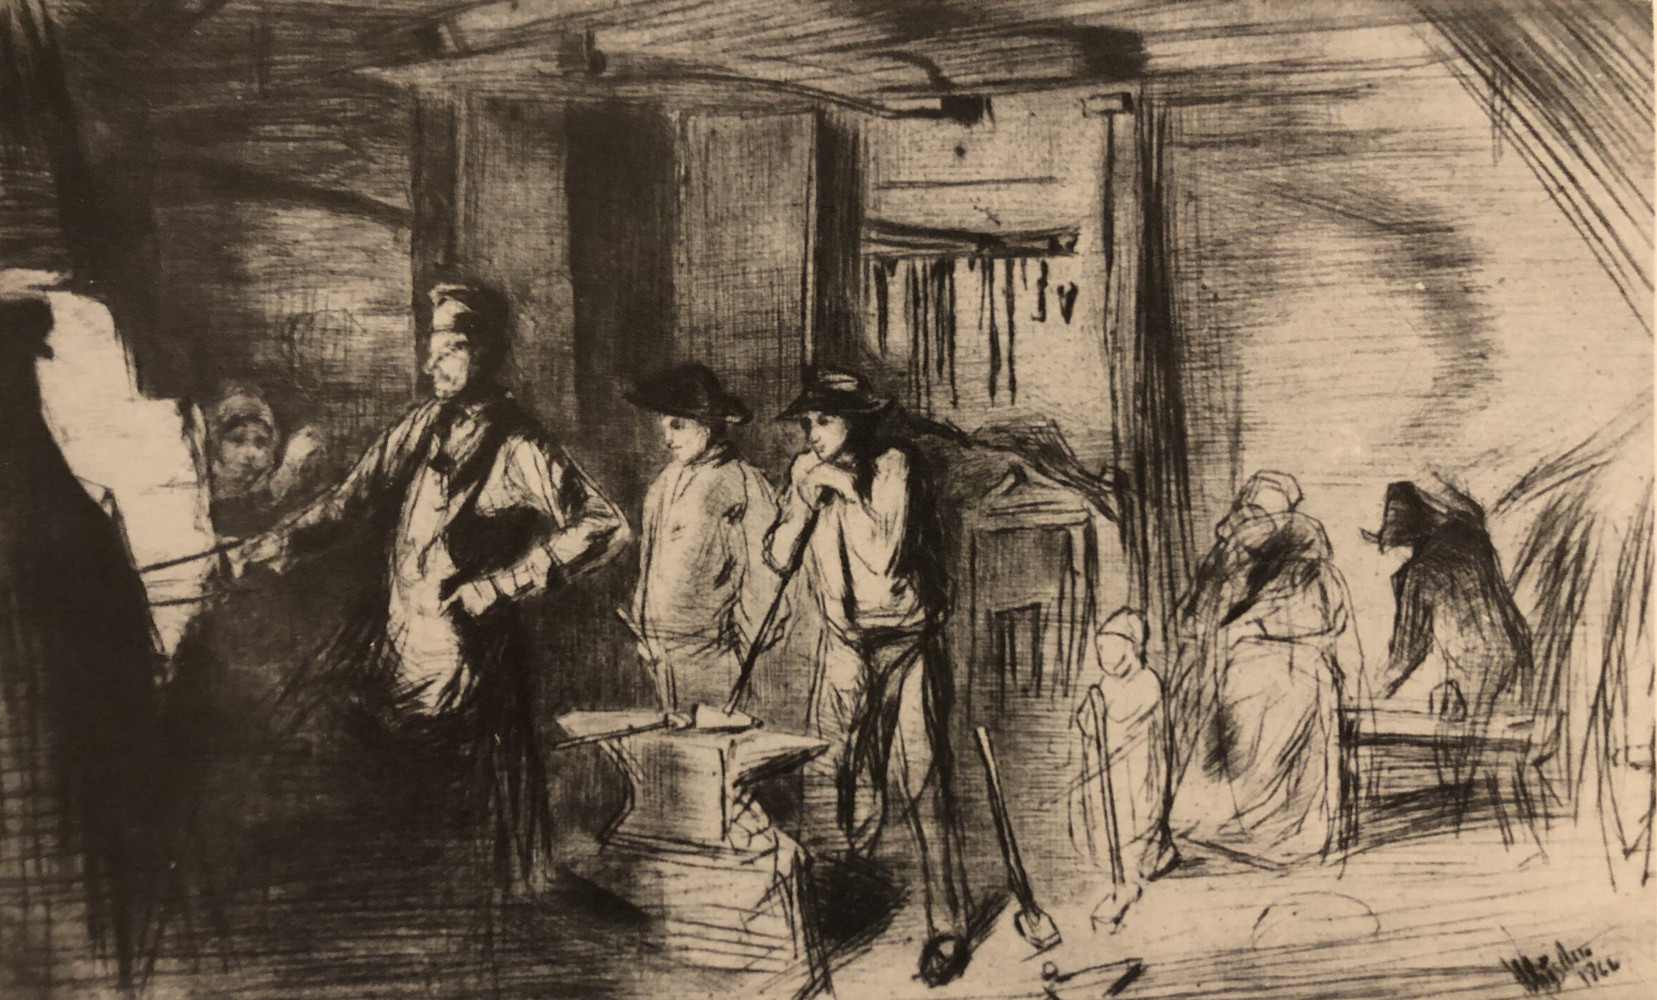 The Forge by James Abbott McNeill Whistler